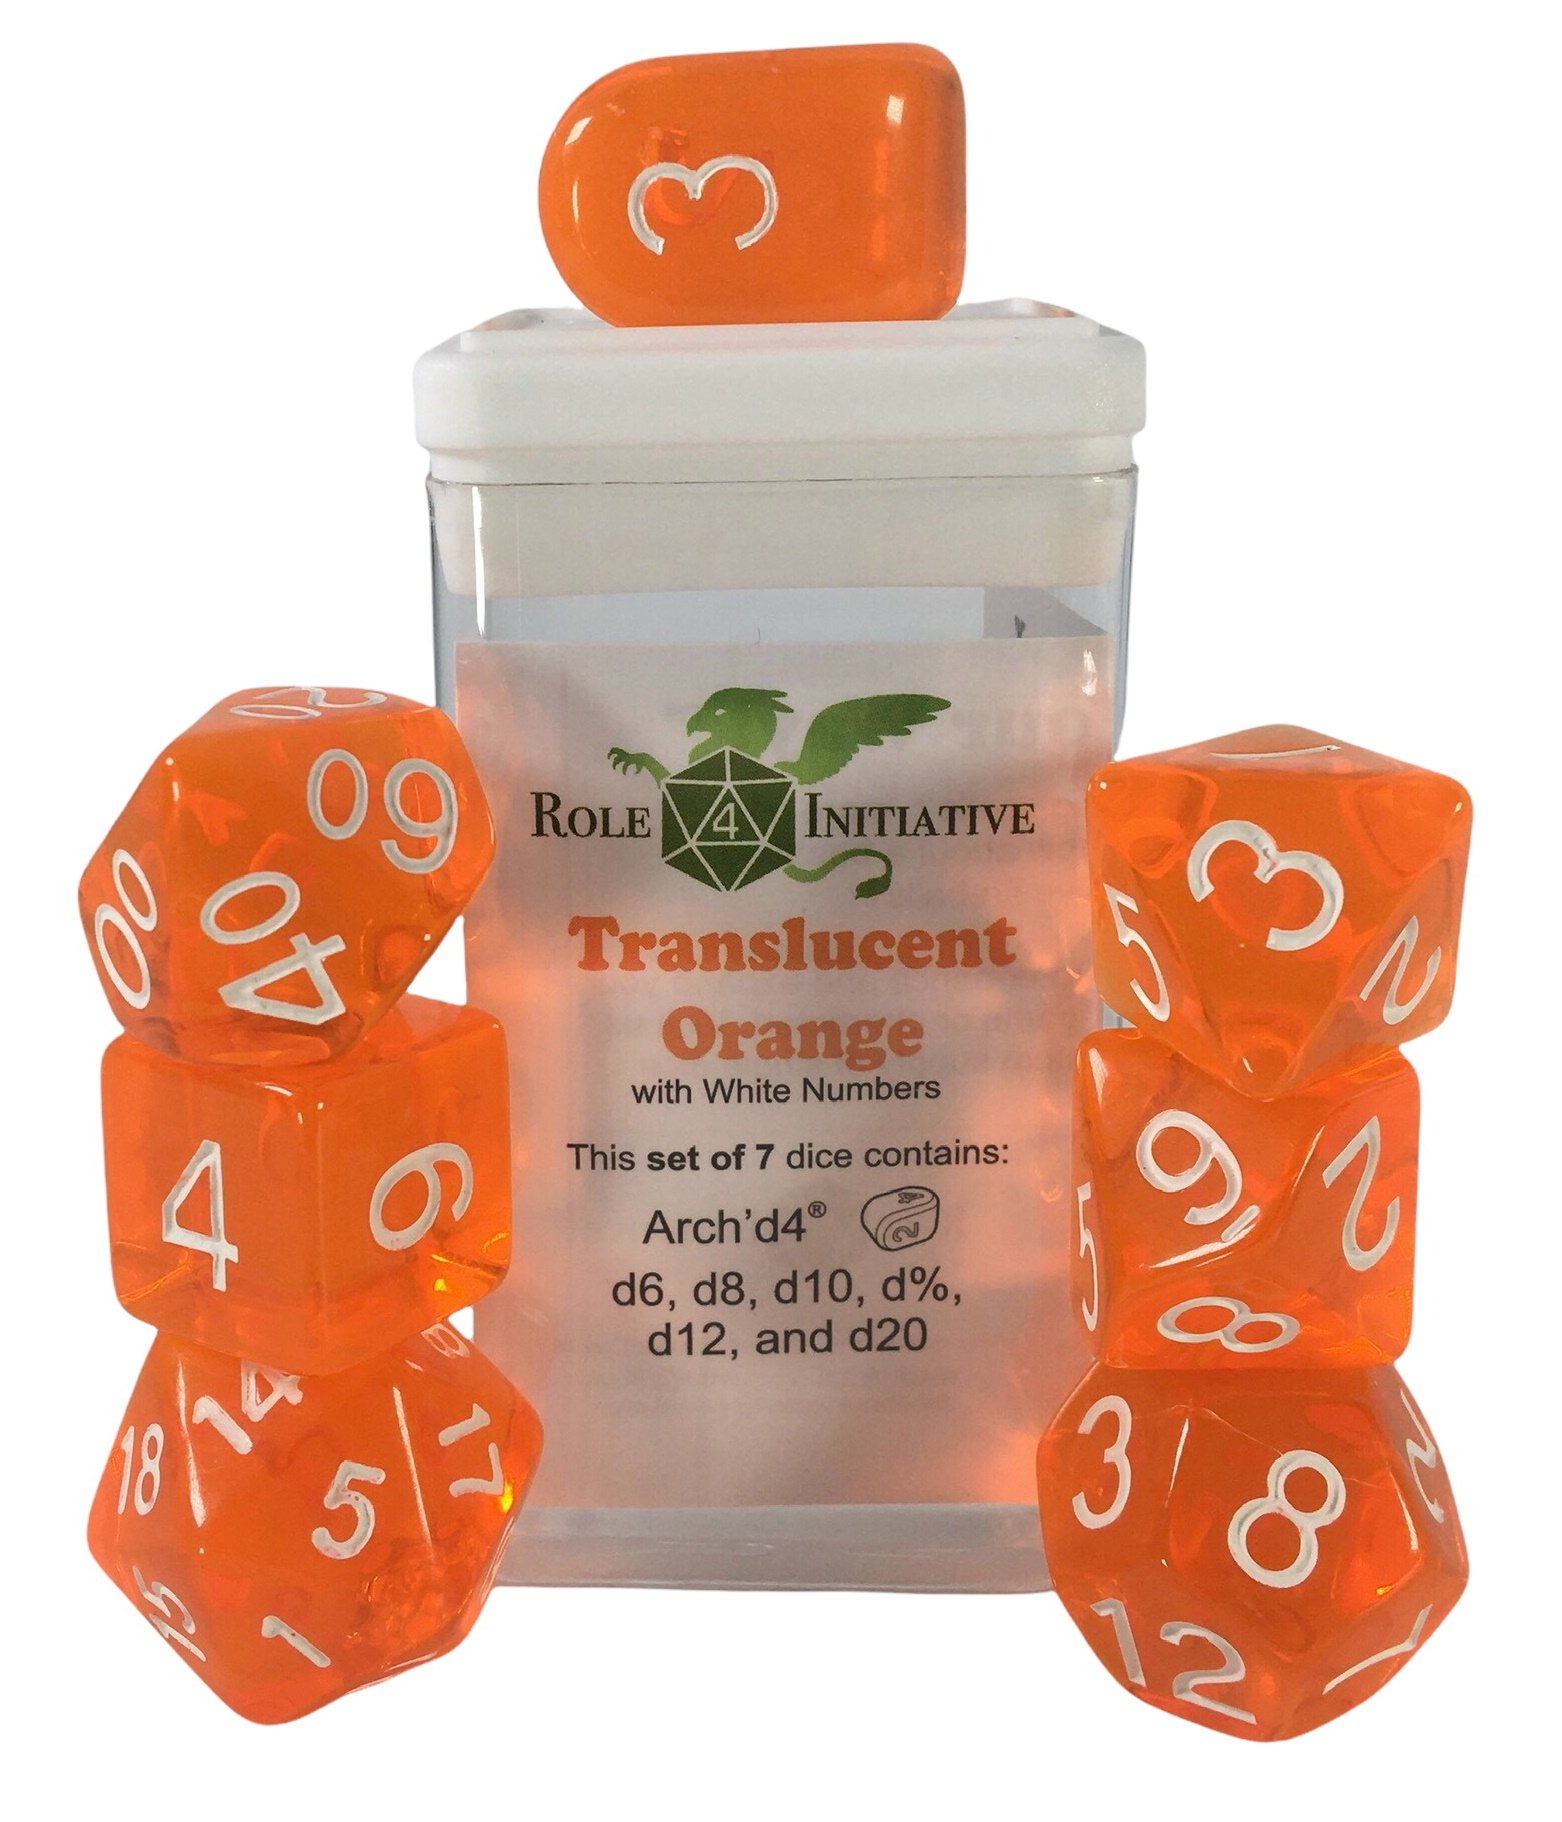 Role 4 Initiative Polyhedral 7 Dice Set: Translucent Orange with White (ArchD4) 